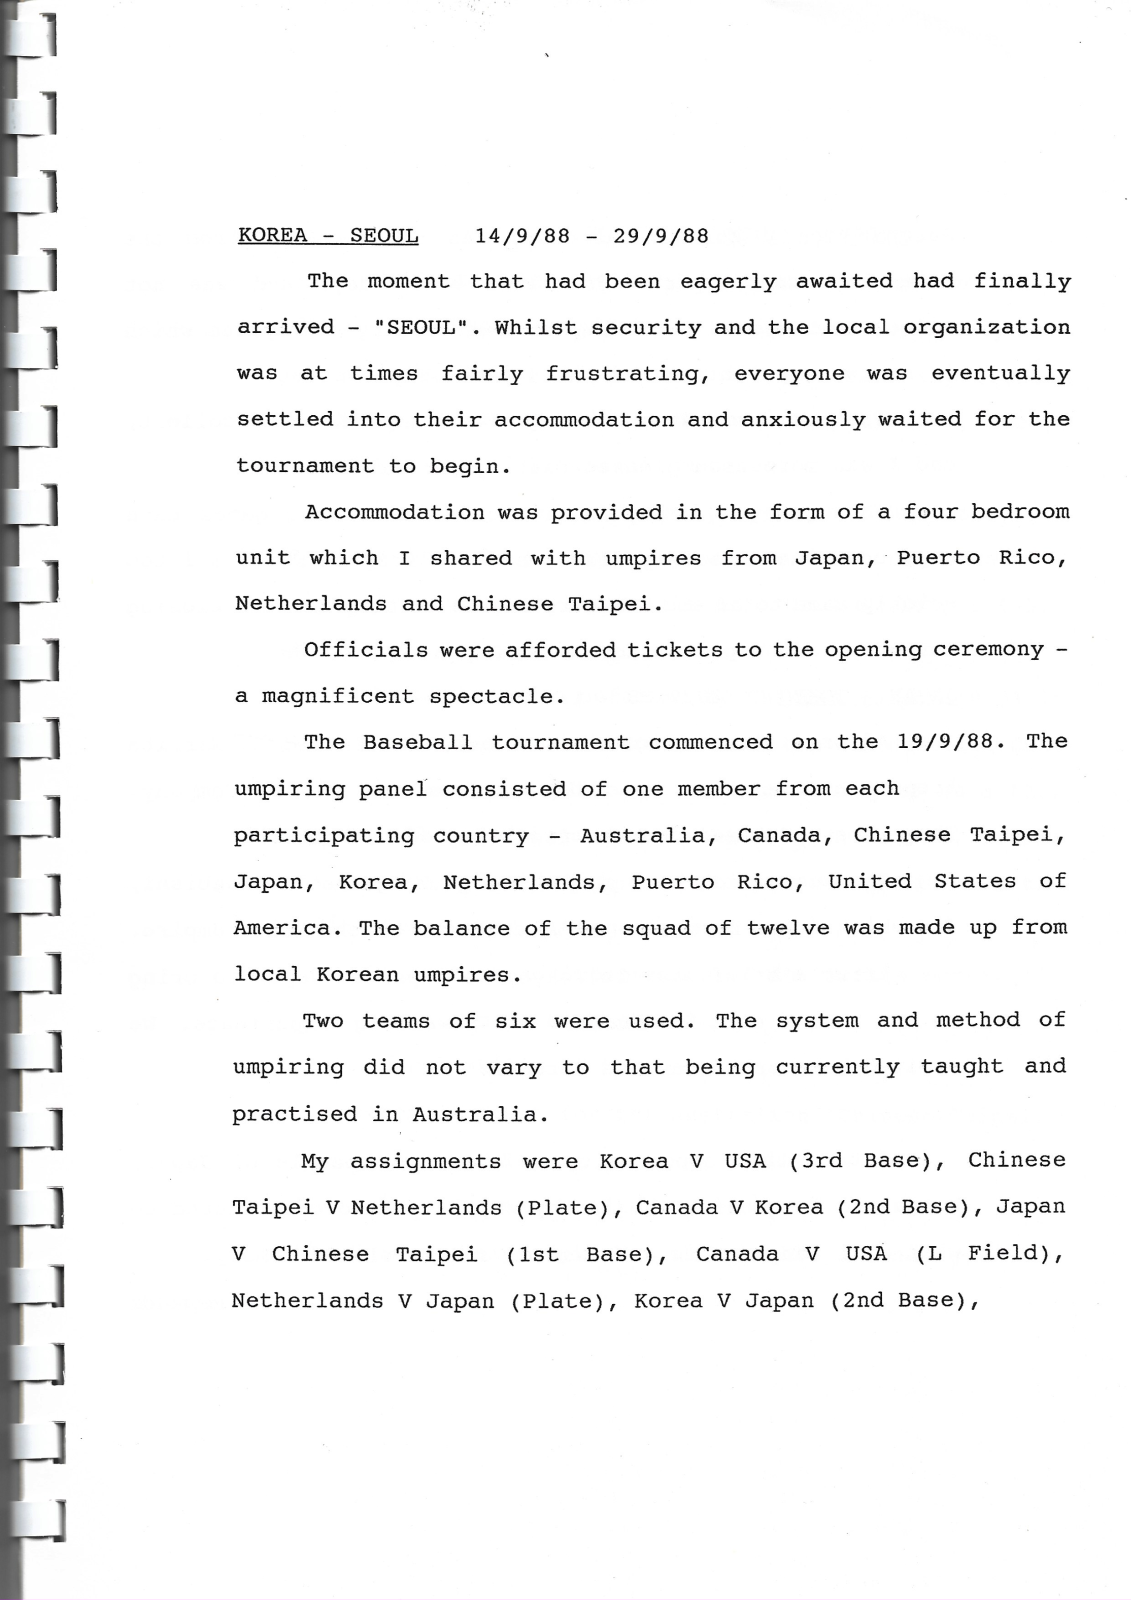 WA Baseball Umpires' Assoc. 1989 annual report (1988 Olympics report 2nd page)